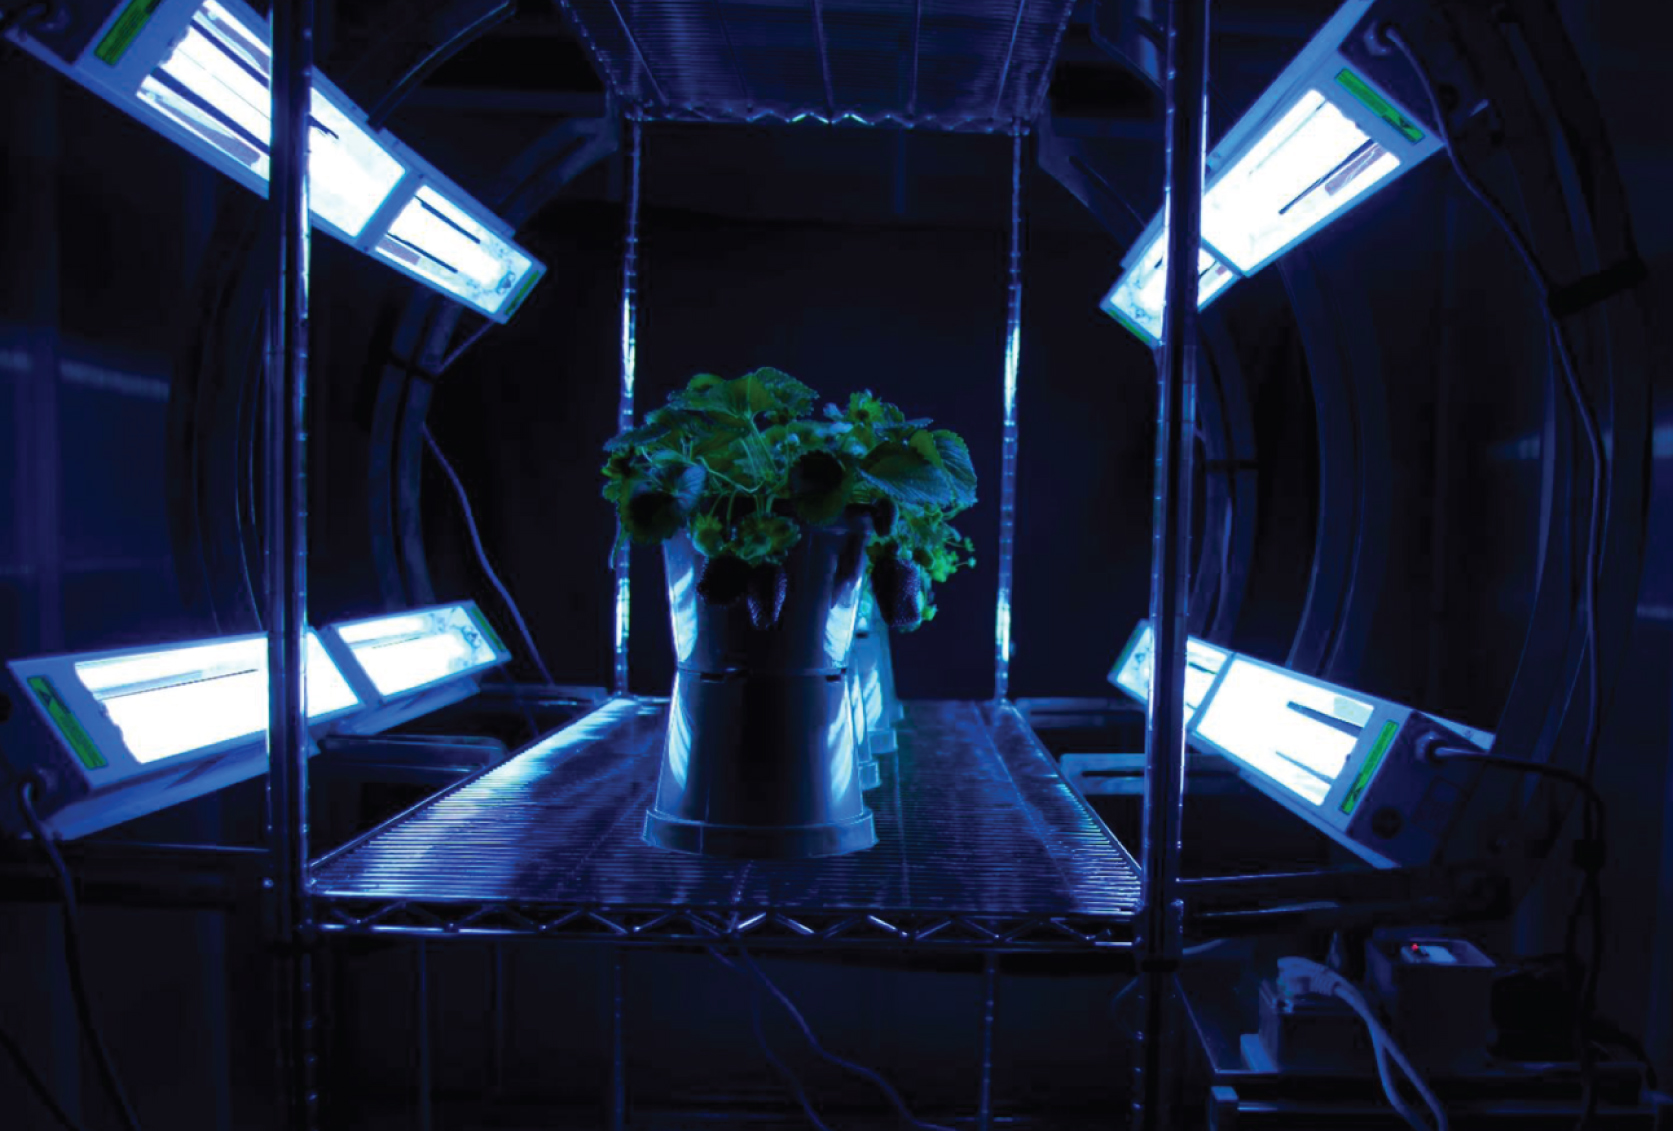 Nighttime UV-C irradiation of strawberry plants with multidirectional positioned lamps to maximize penetration into plant canopy.